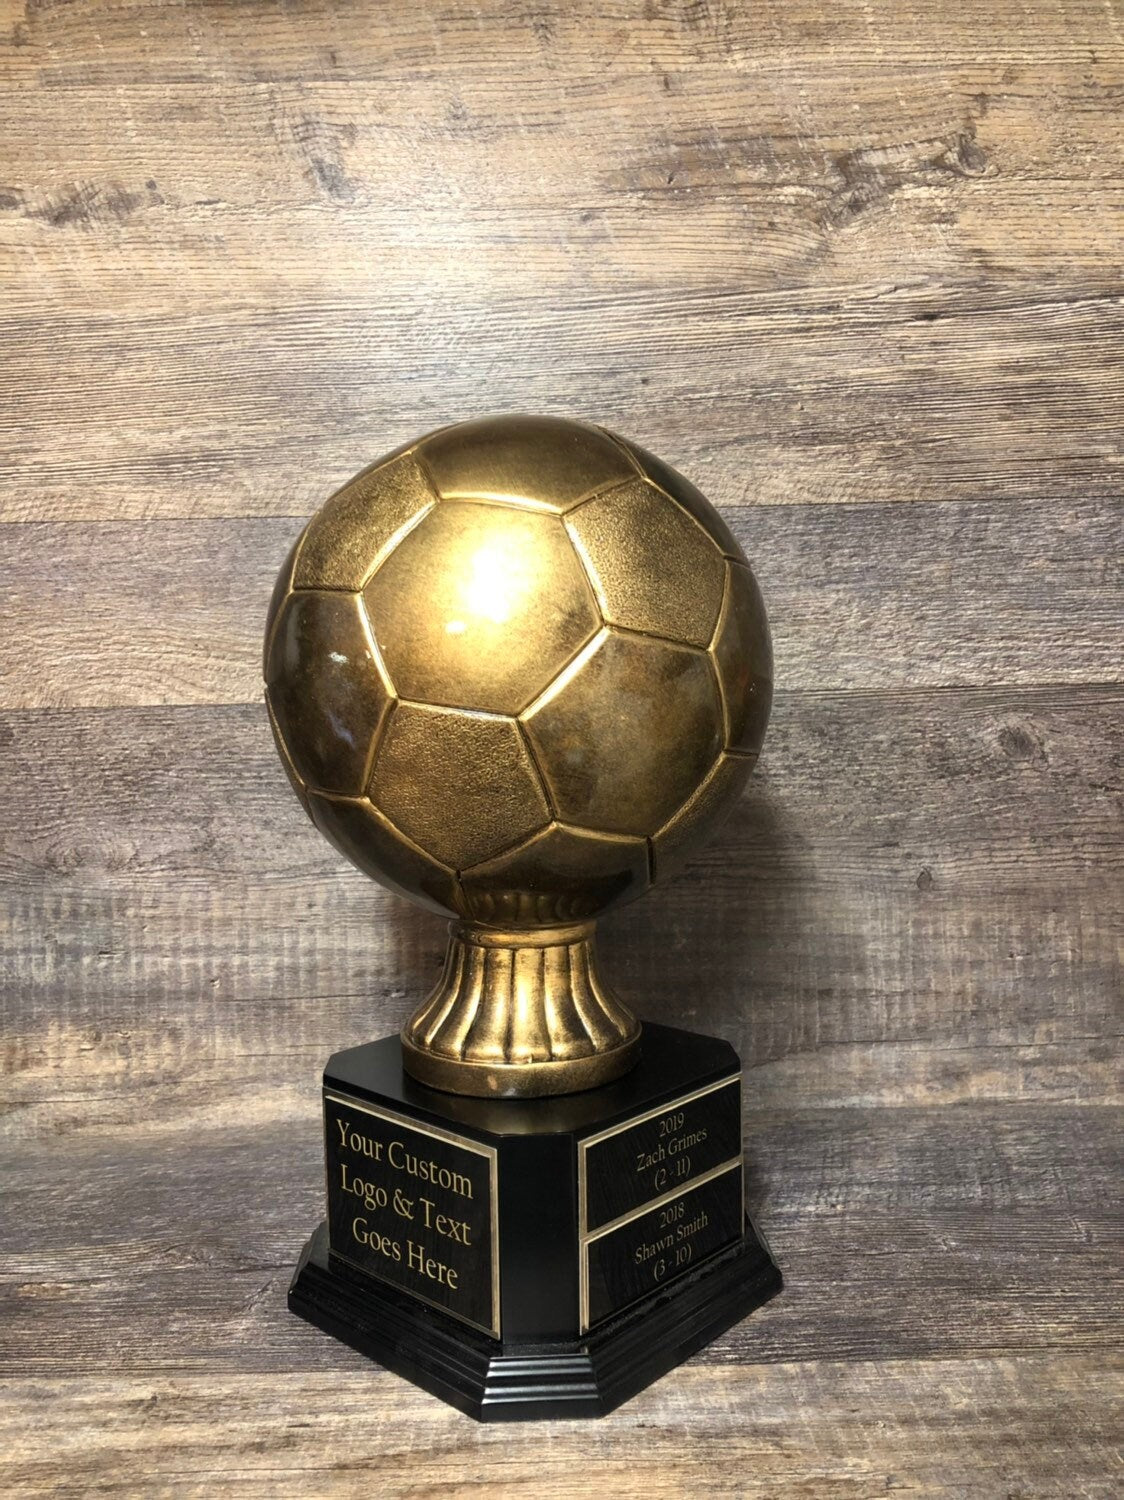 Soccer Trophy Fantasy Soccer Football League Trophy 15" FULL SIZE Antique Gold Soccer Ball 6 or 12 Year Perpetual Championship League Award